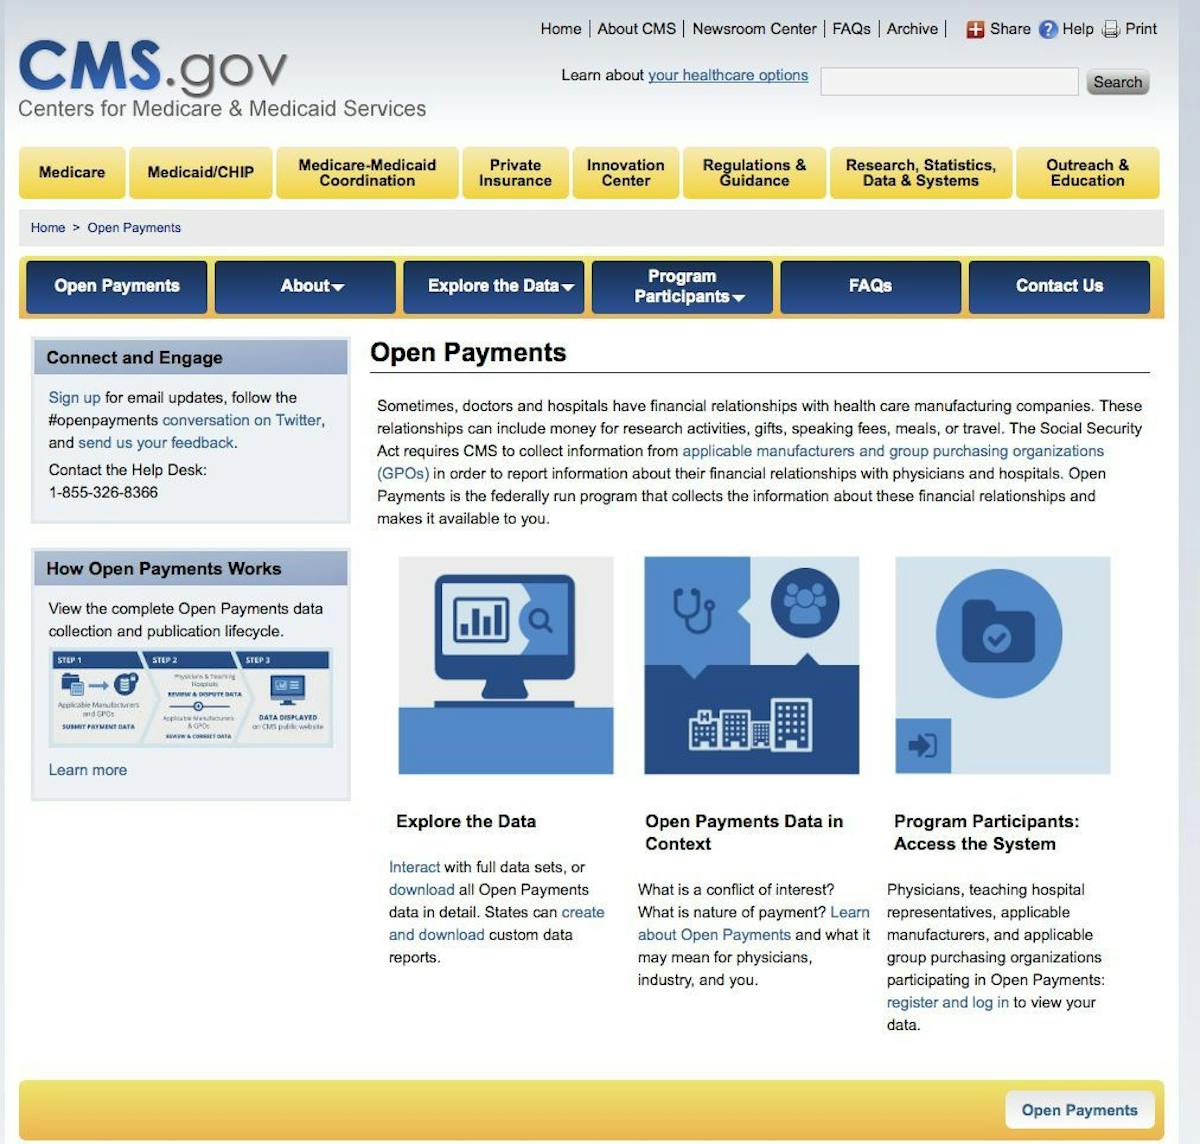 This image provided by the Department of Health and Humans Services shows the Open Payments page of the Centers for Medicare & Medicaid Services. From